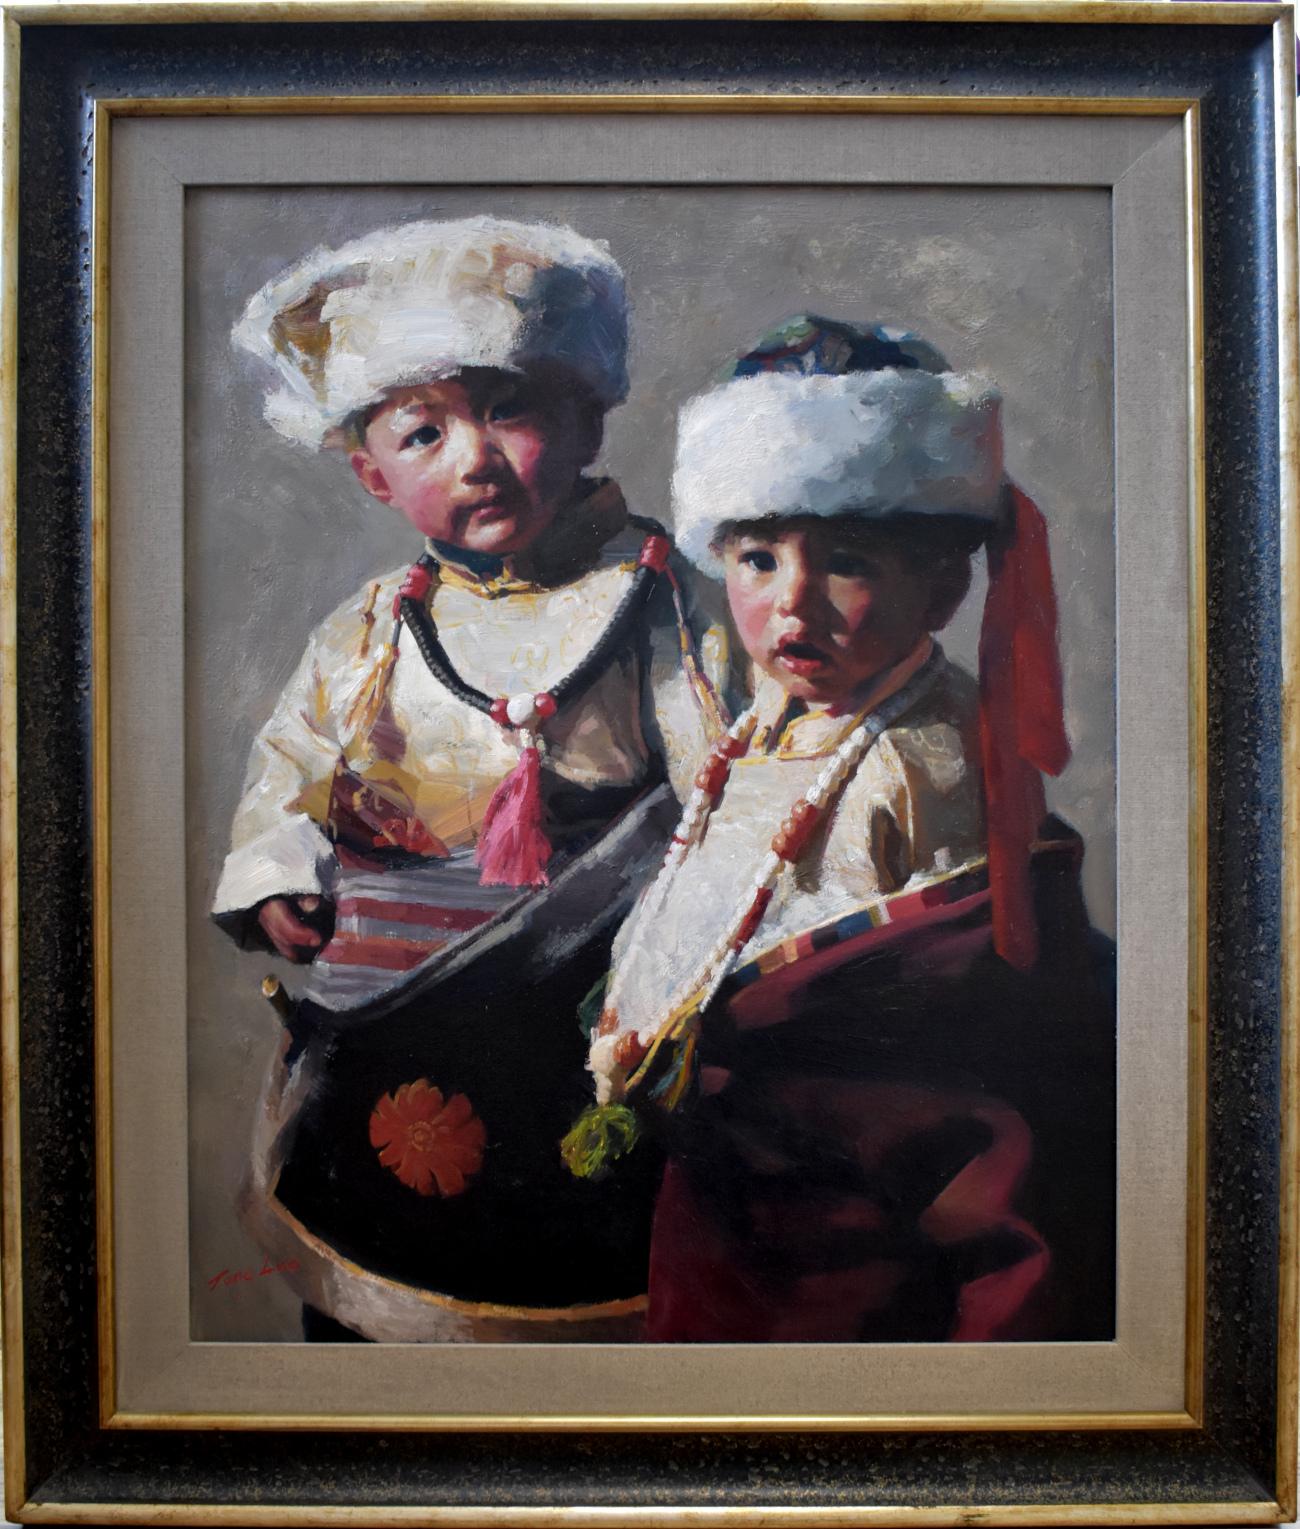 Tong Luo Figurative Painting – „Two Boys“ CHINESE YOUNG BOYS.  SCHÖN